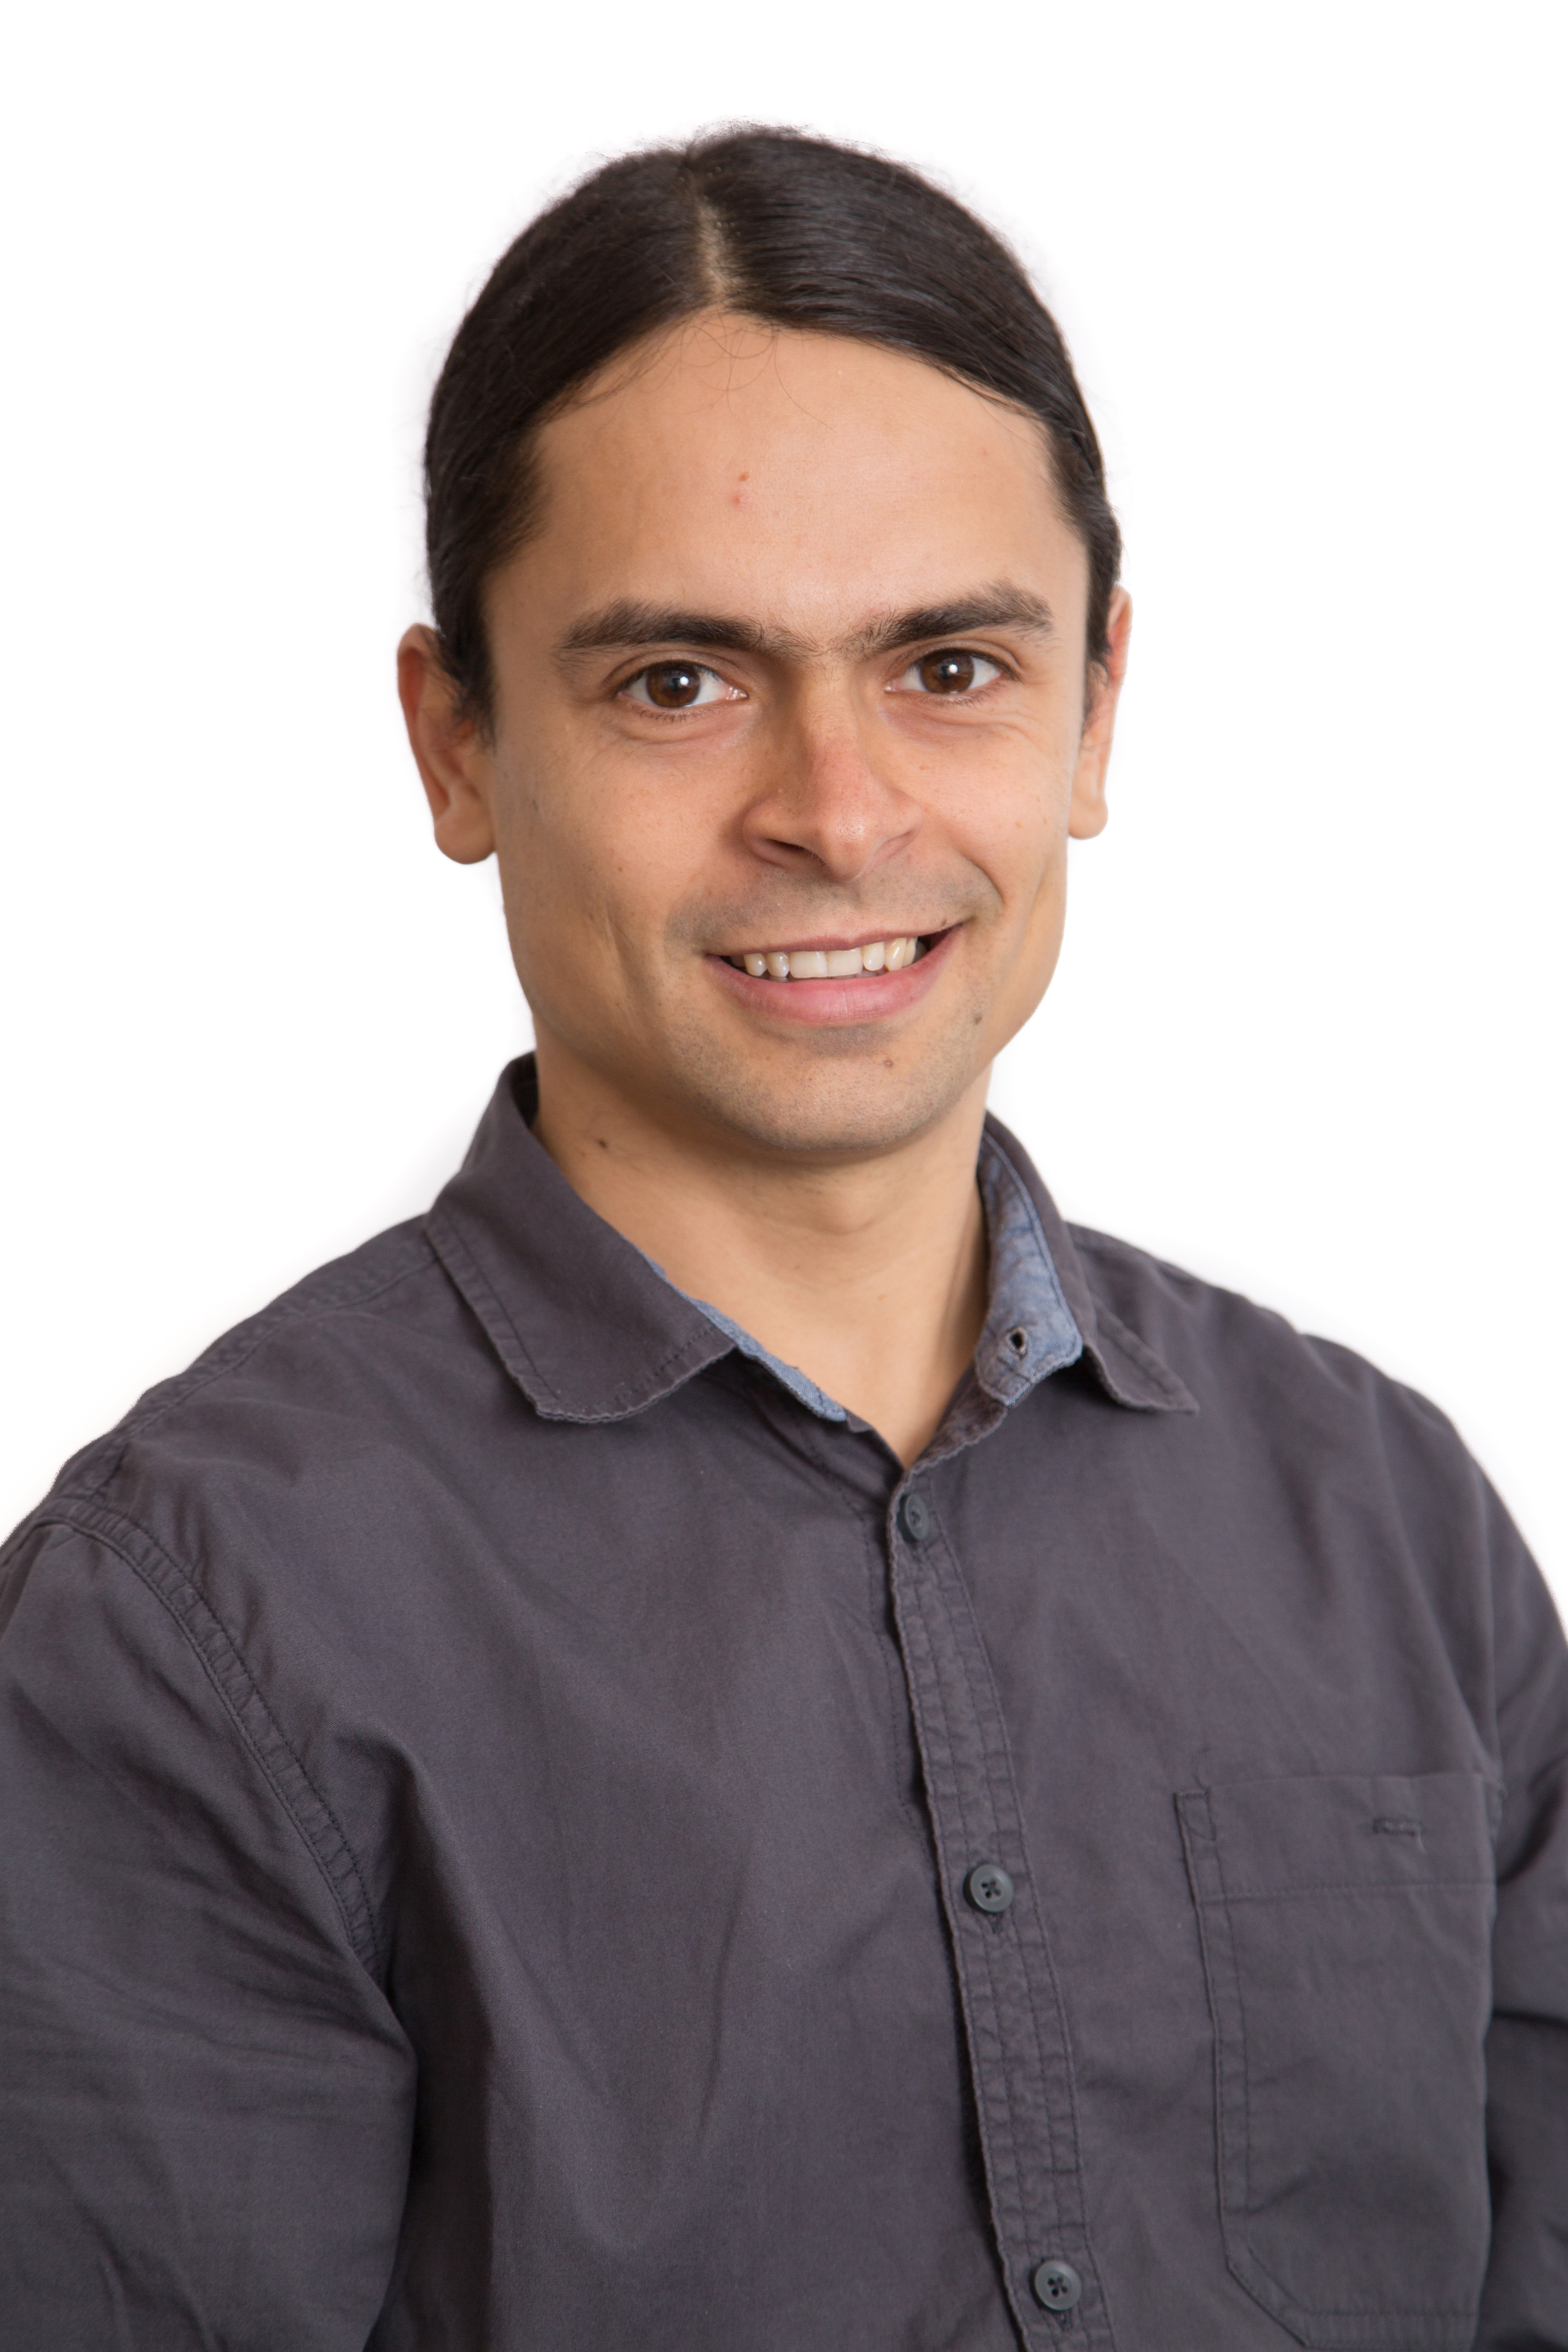 Stefan Buzoianu, research and development project manager for Tonisity